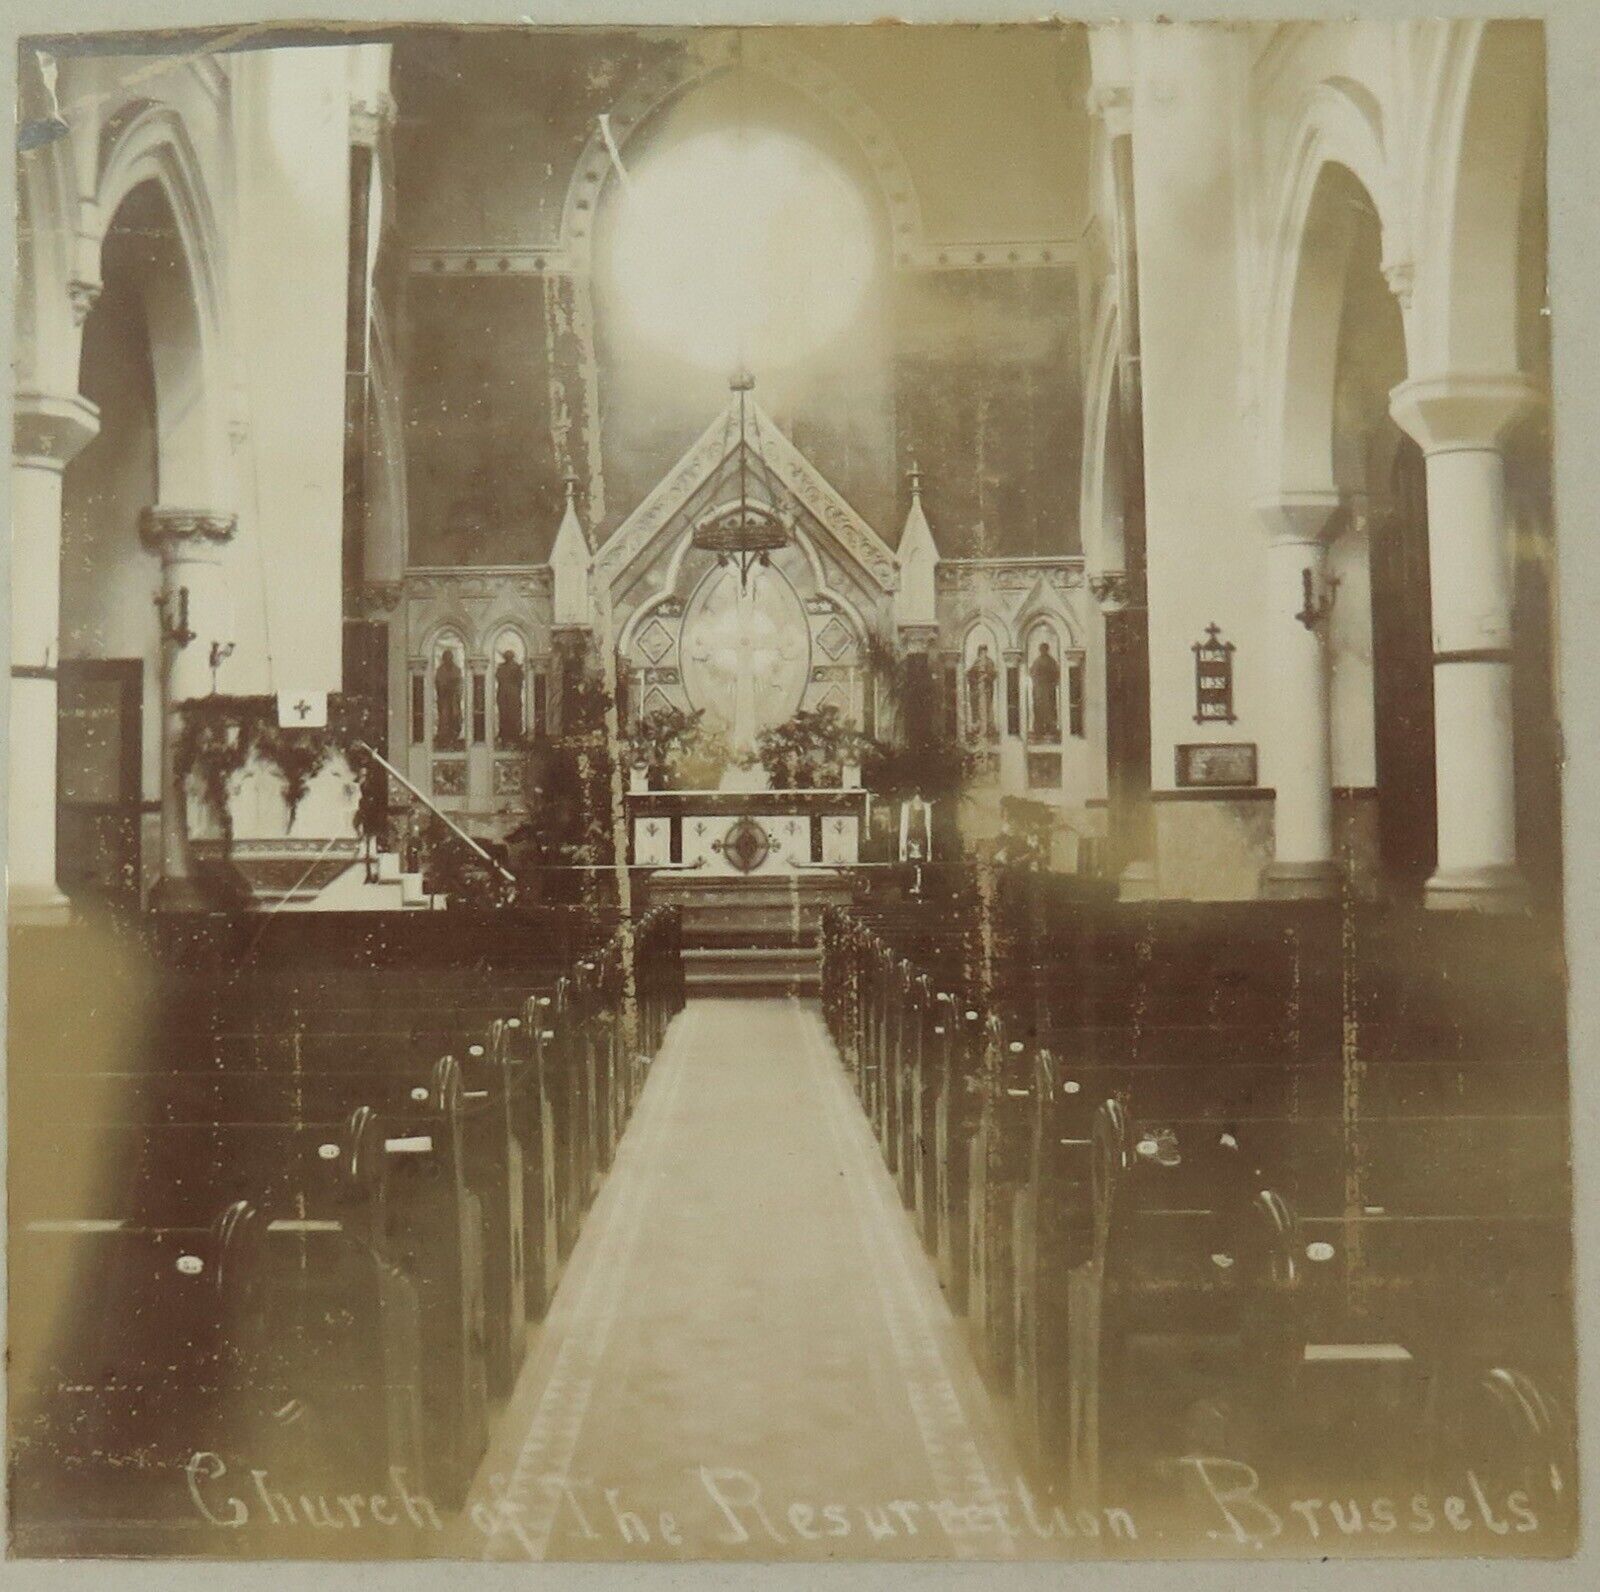 RARE Late 1800s Internal Photo of “Church of The Resurrection, Brussels”